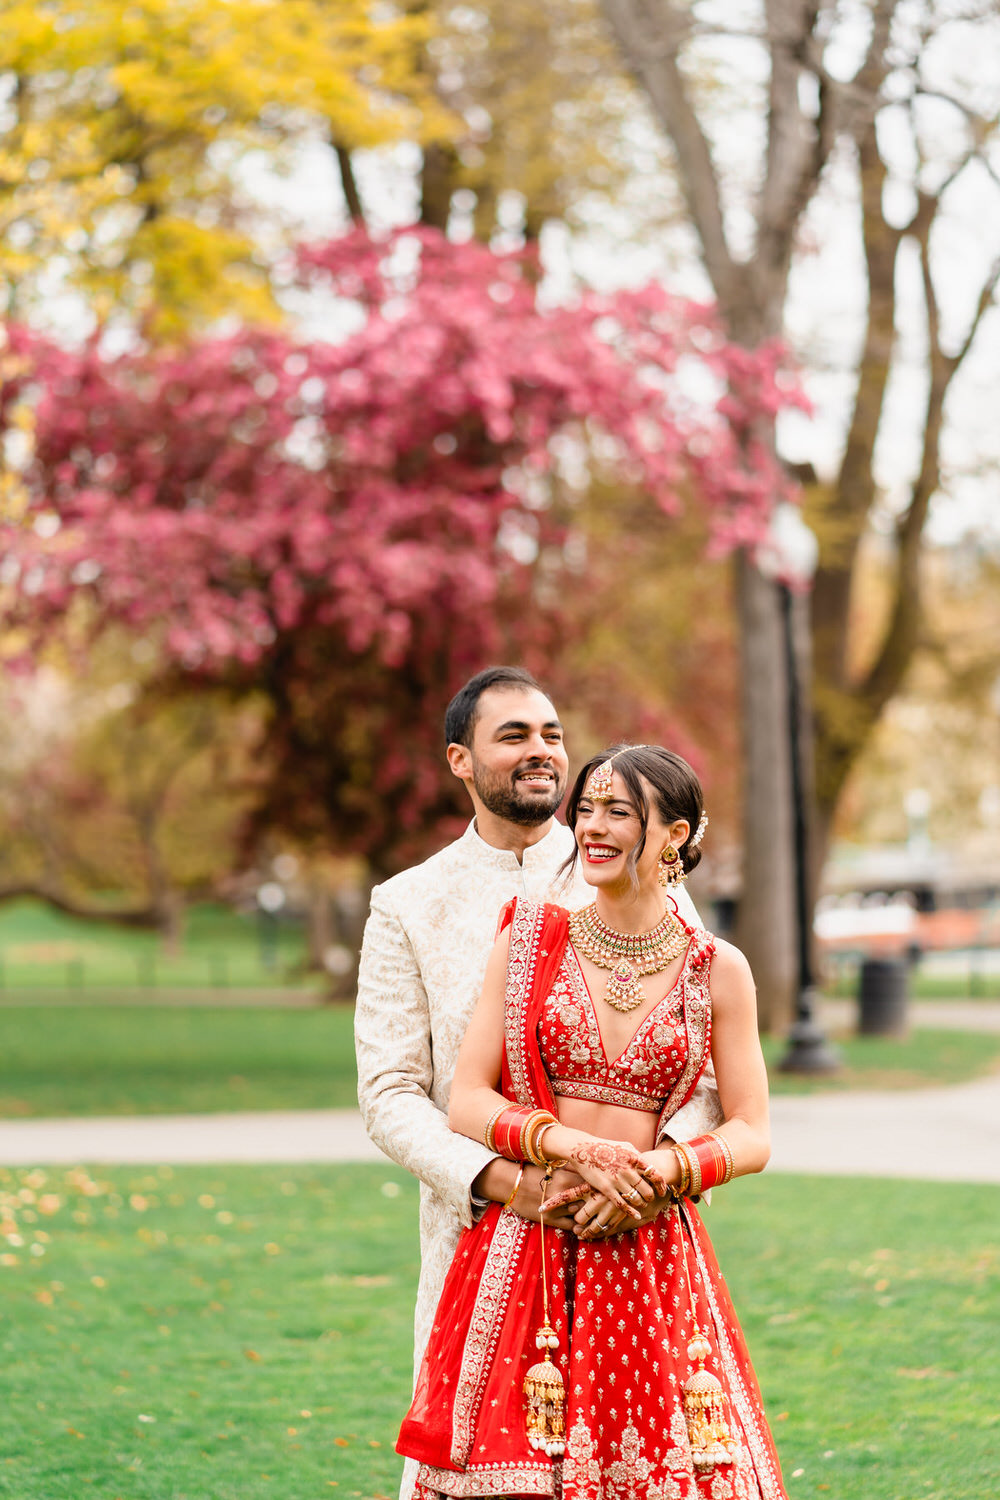 a bride and groom pose for a picture in a park.